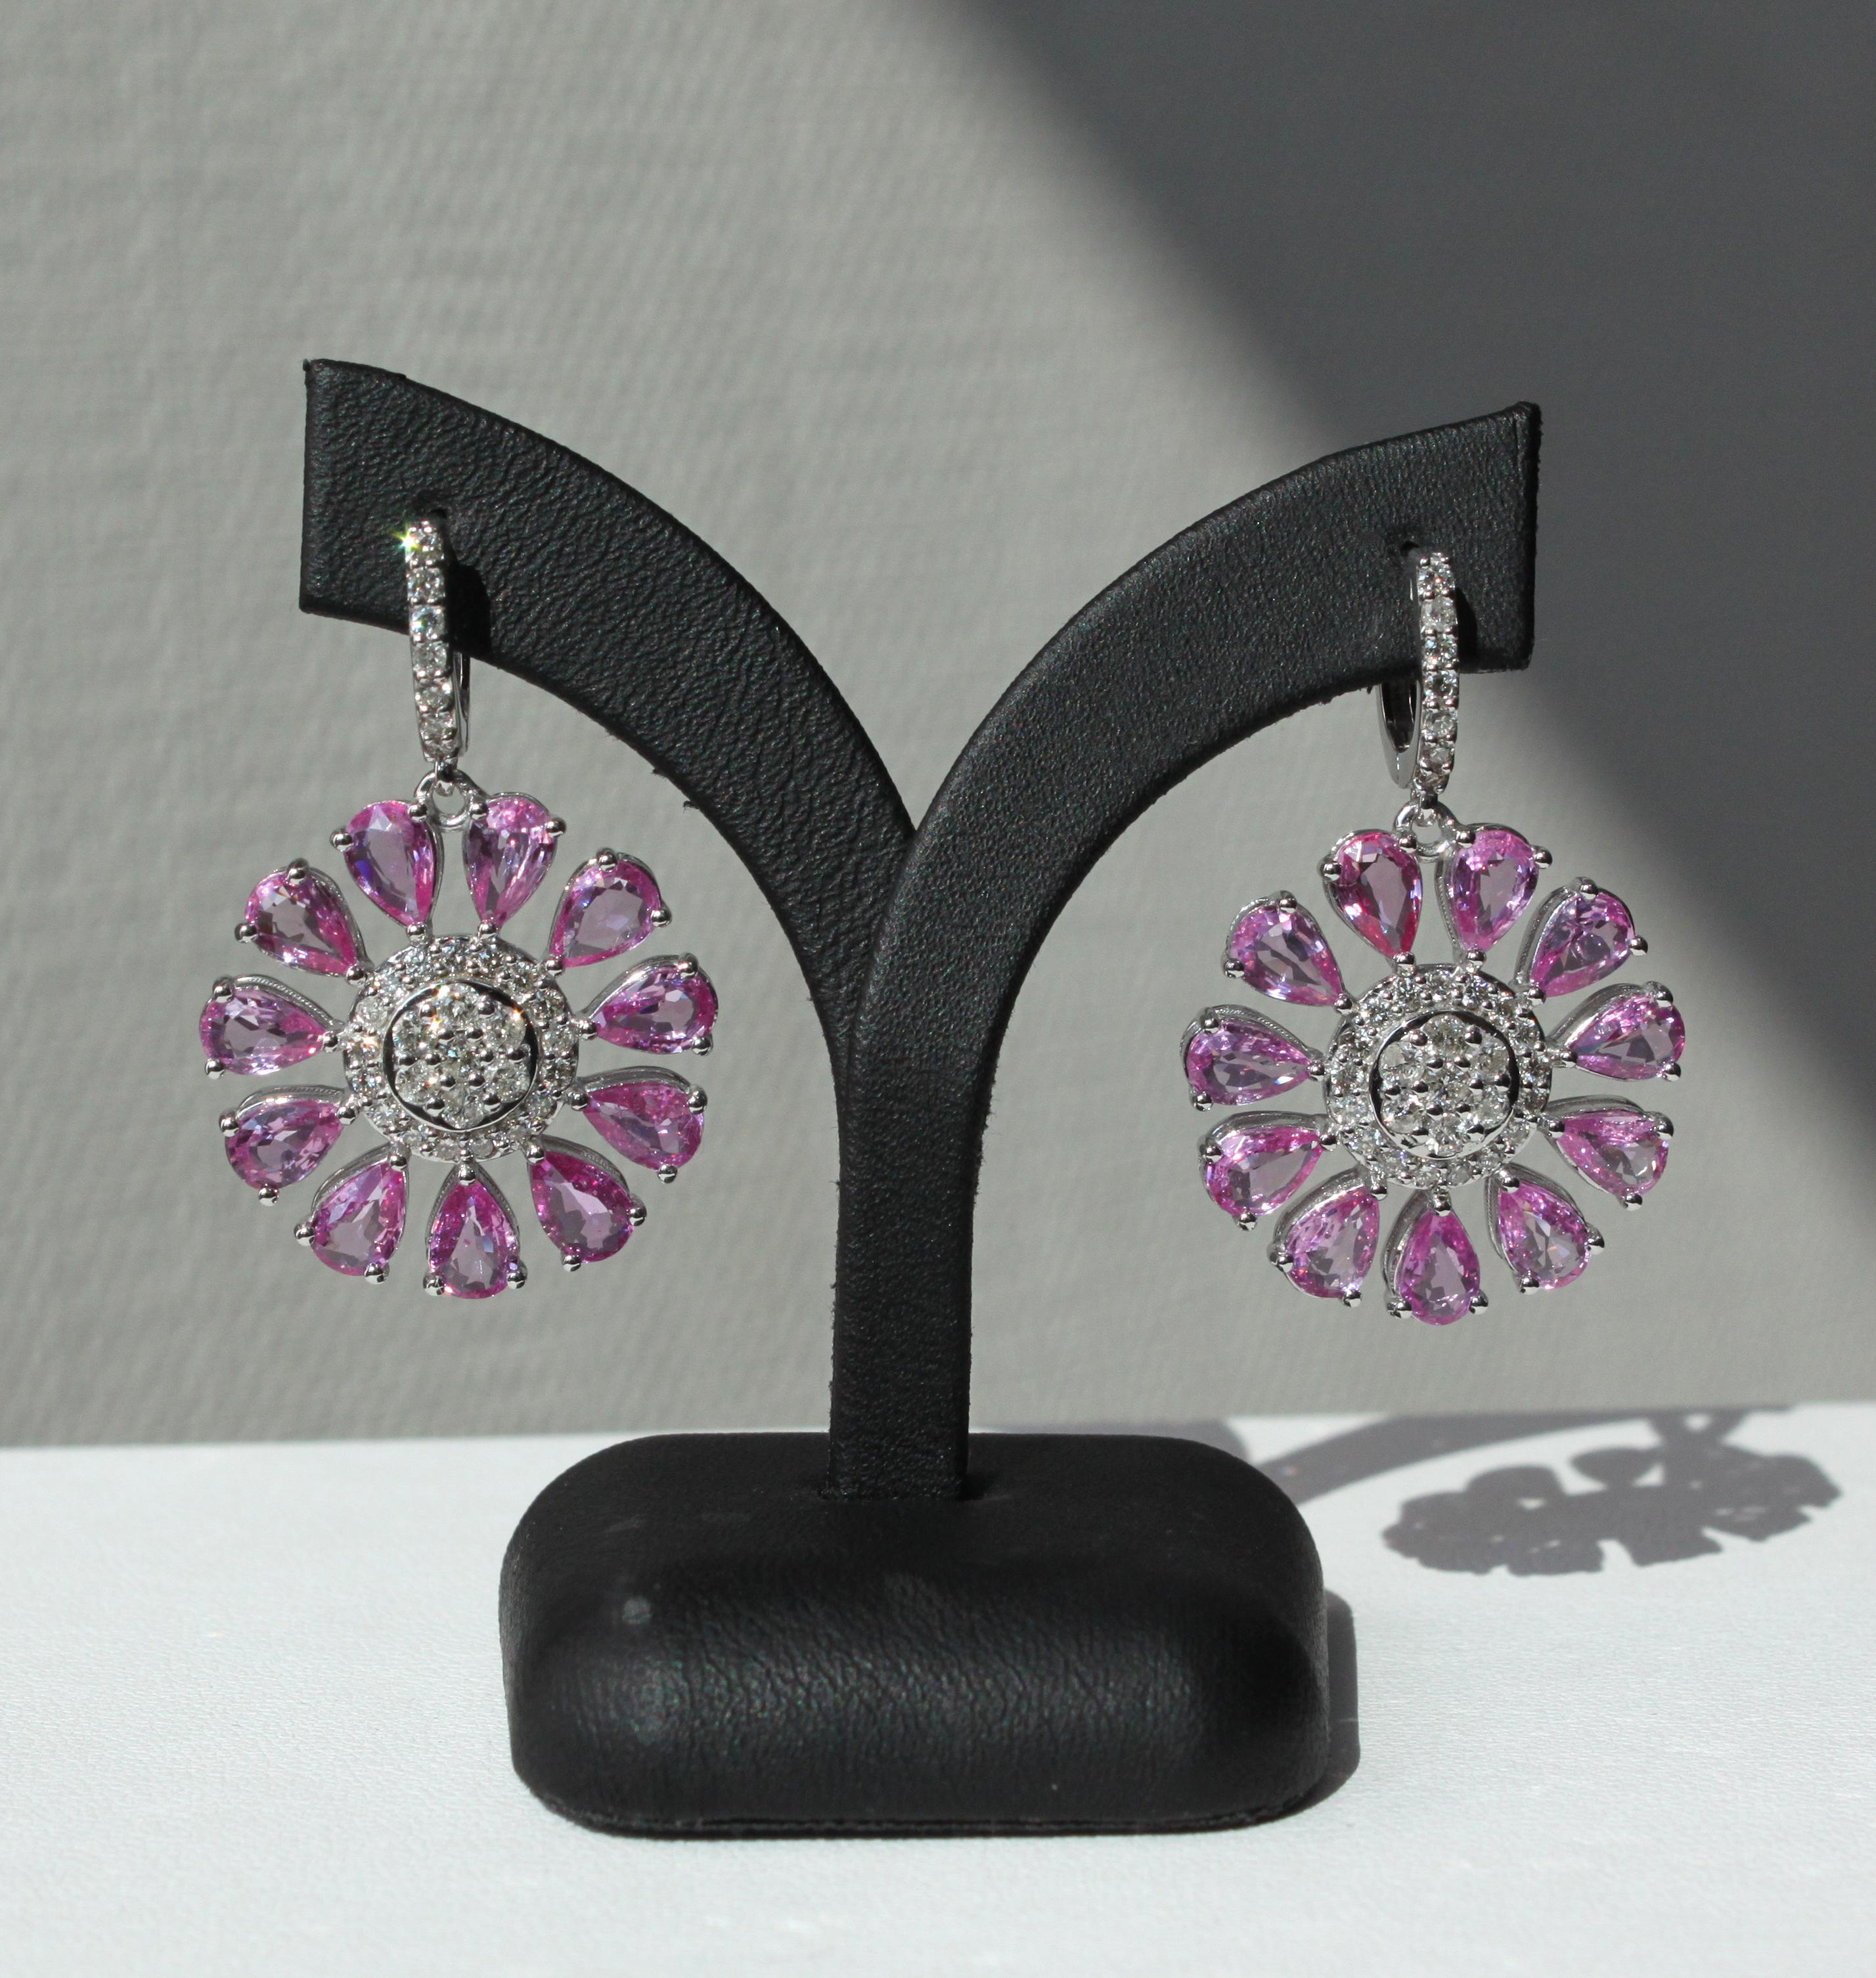 14K white gold
1.27ct natural diamonds VS-SI quality and Top Top light brown (TLB/ TTLB) colour
8.55ct natural pink sapphire VS-SI quality (light to medium colour)
Total earring weight 13.08g

Adorn your ears with sophistication and grace with our